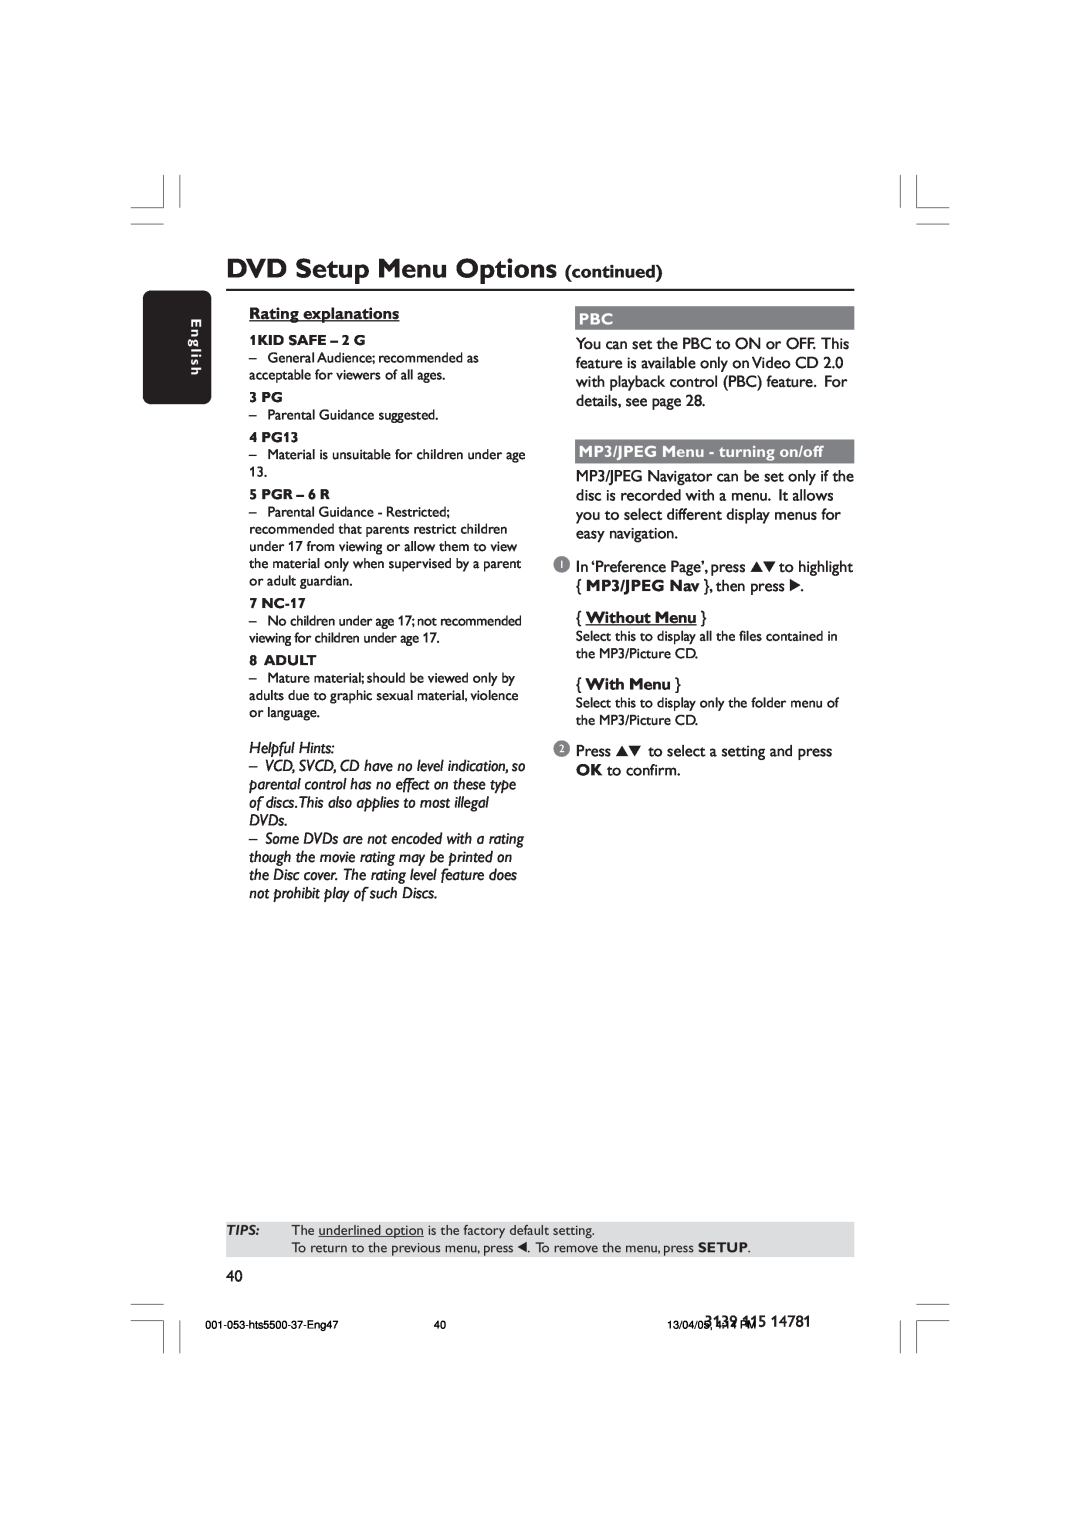 Philips HTS5500C DVD Setup Menu Options continued, Rating explanations, MP3/JPEG Menu - turning on/off, Without Menu 